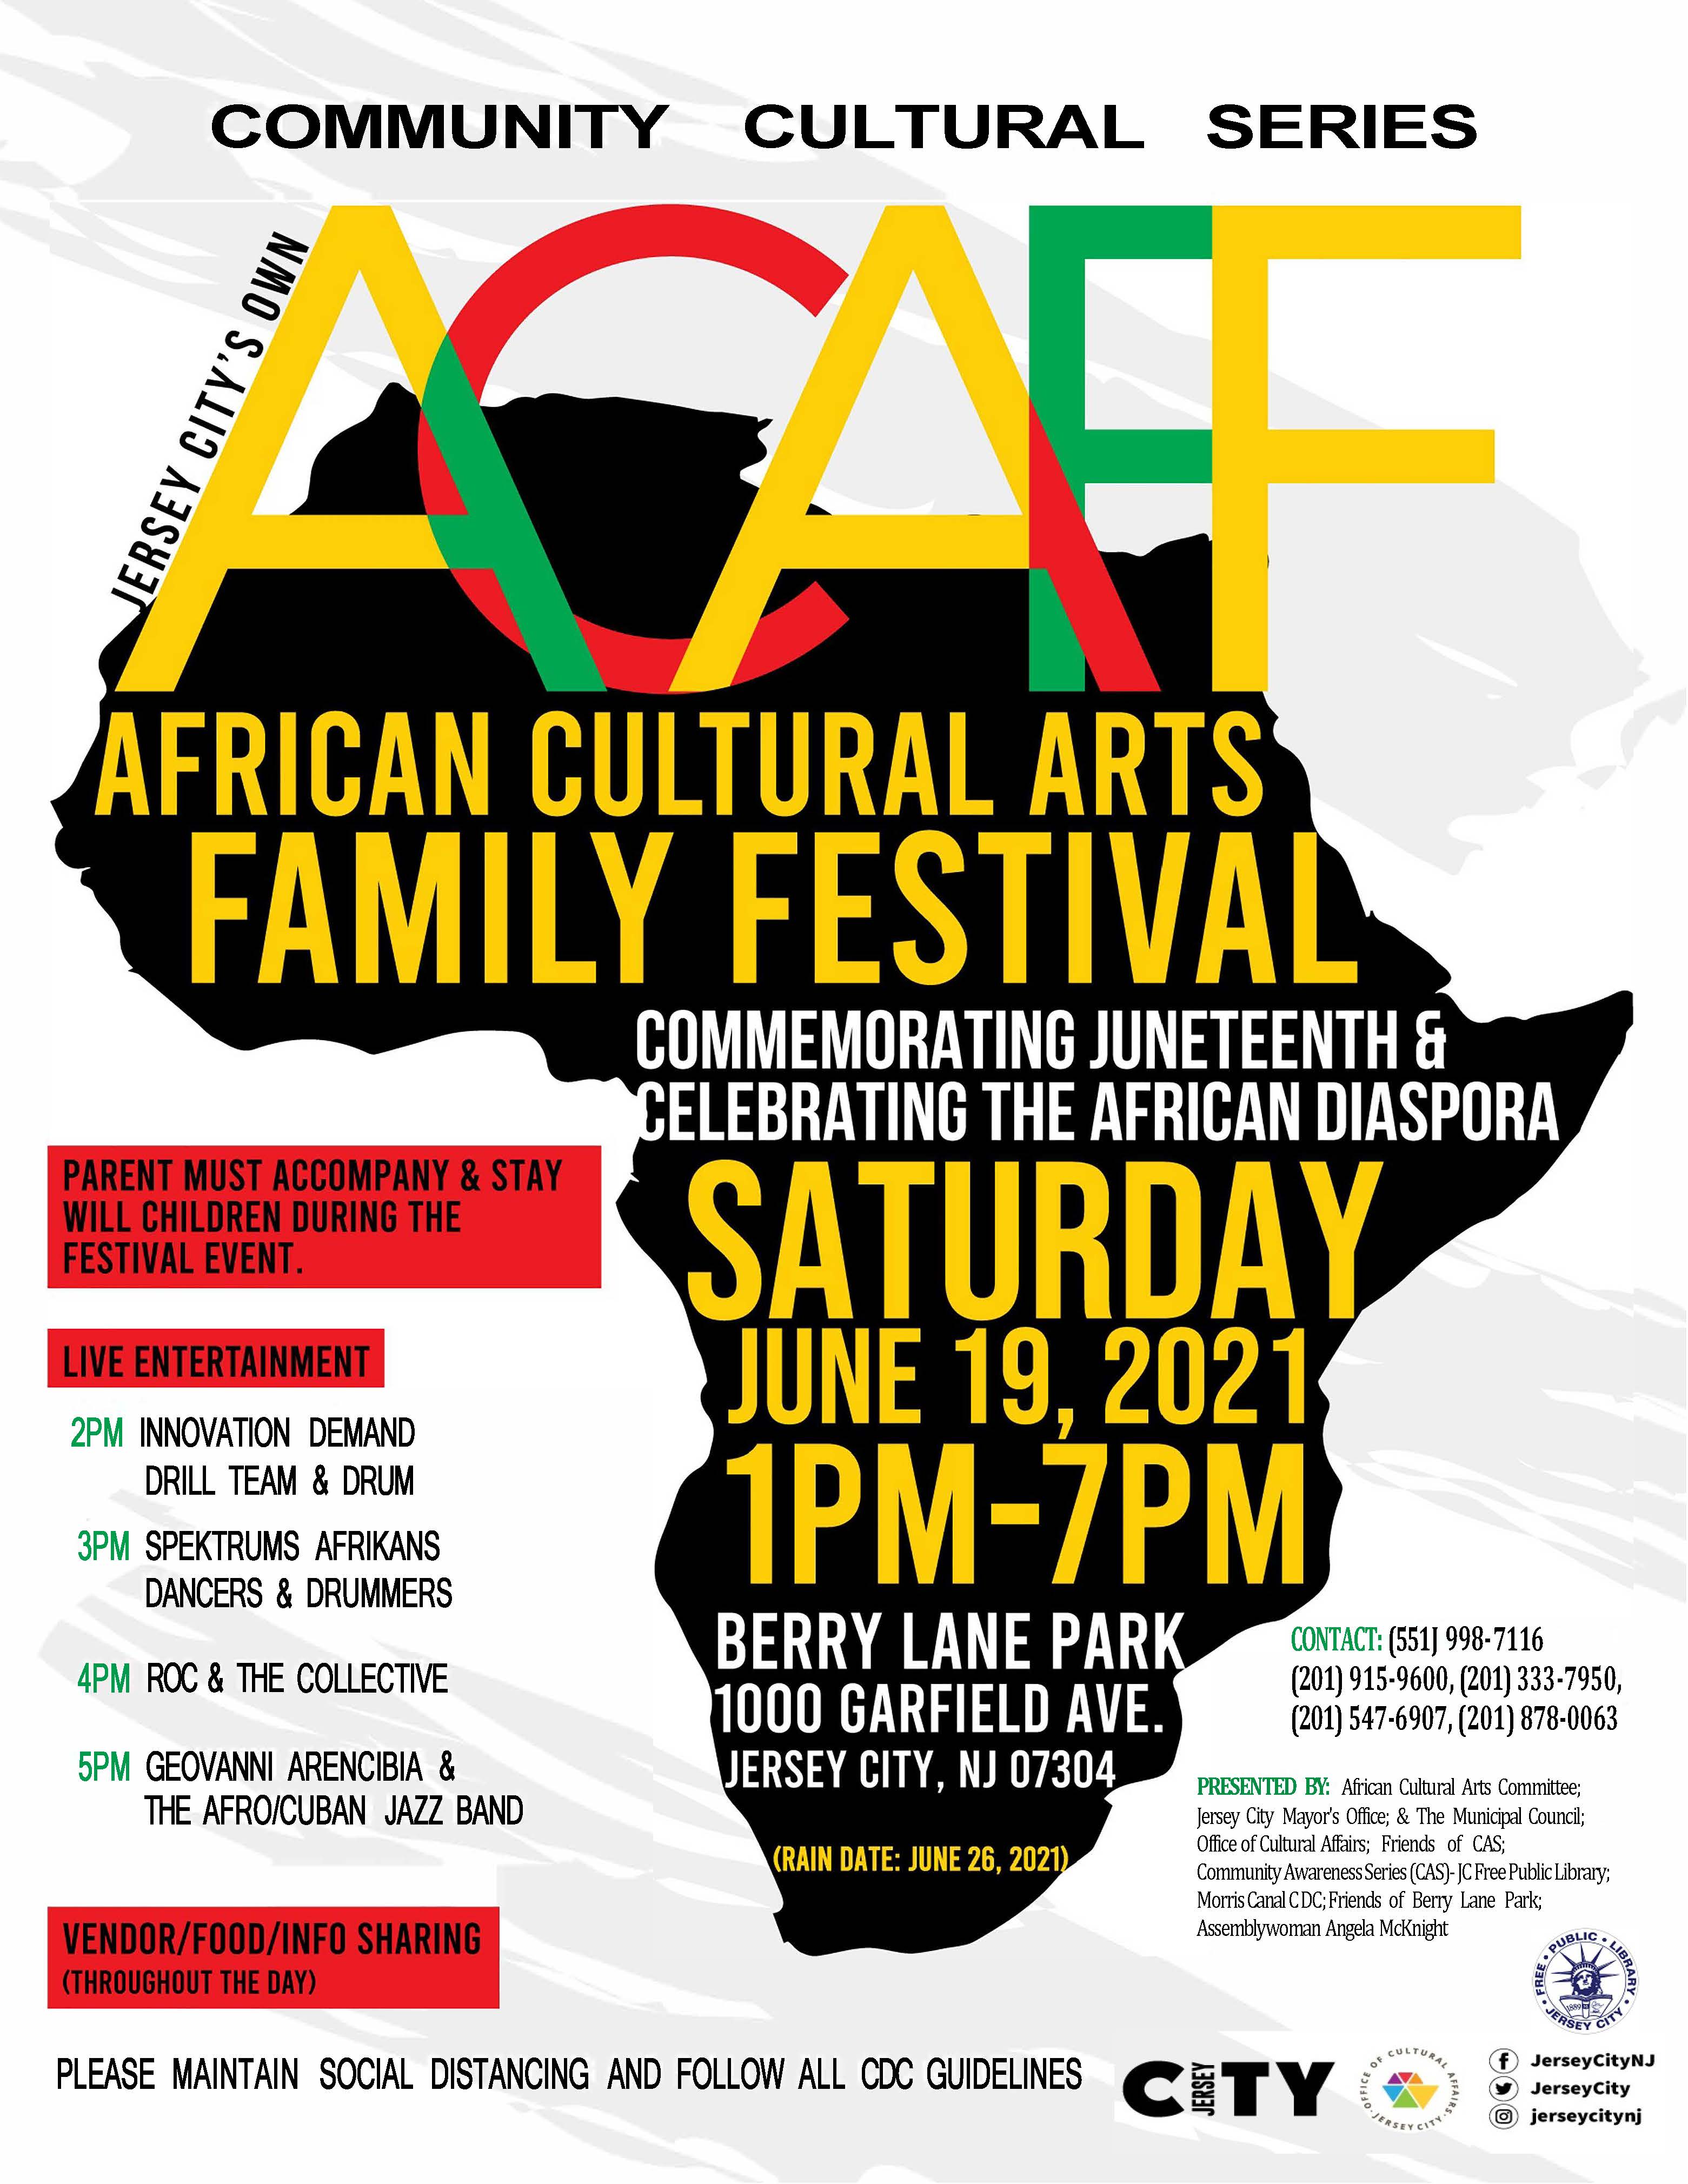 African Cultural Arts Family Festival 2021